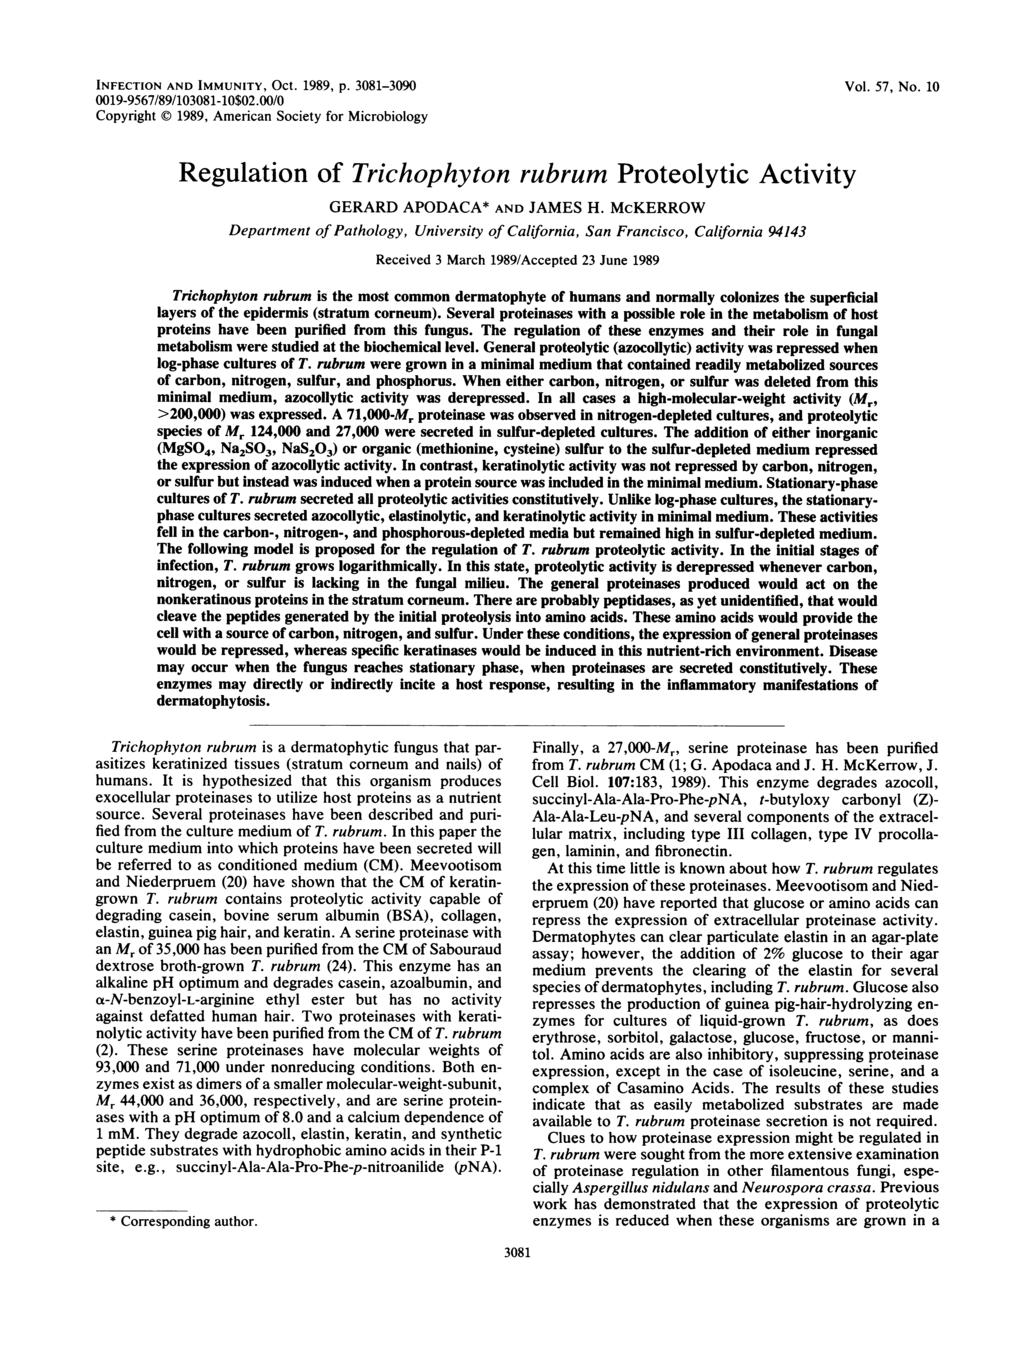 INFECTION AND IMMUNITY, OCt. 1989, p. 3081-3090 0019-9567/89/103081-10$02.00/0 Copyright 1989, American Society for Microbiology Vol. 57, No.